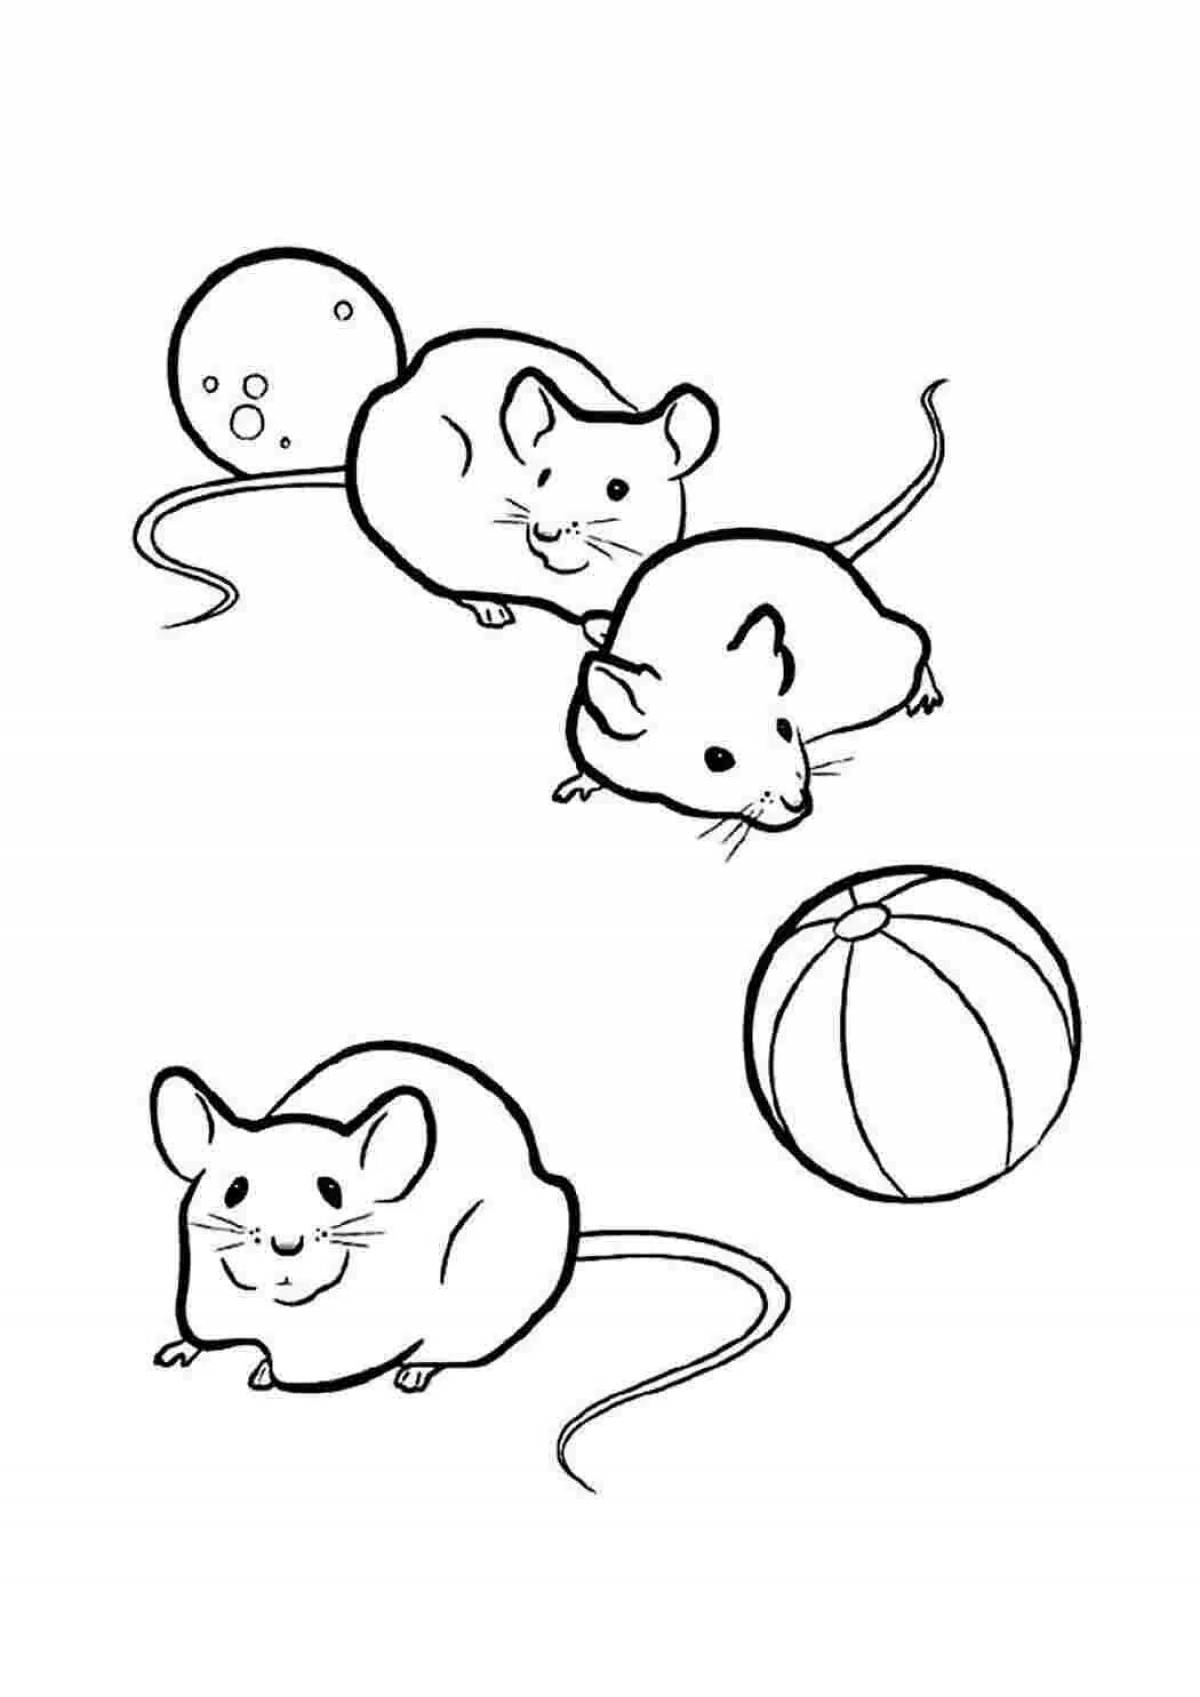 Animated mouse drawing